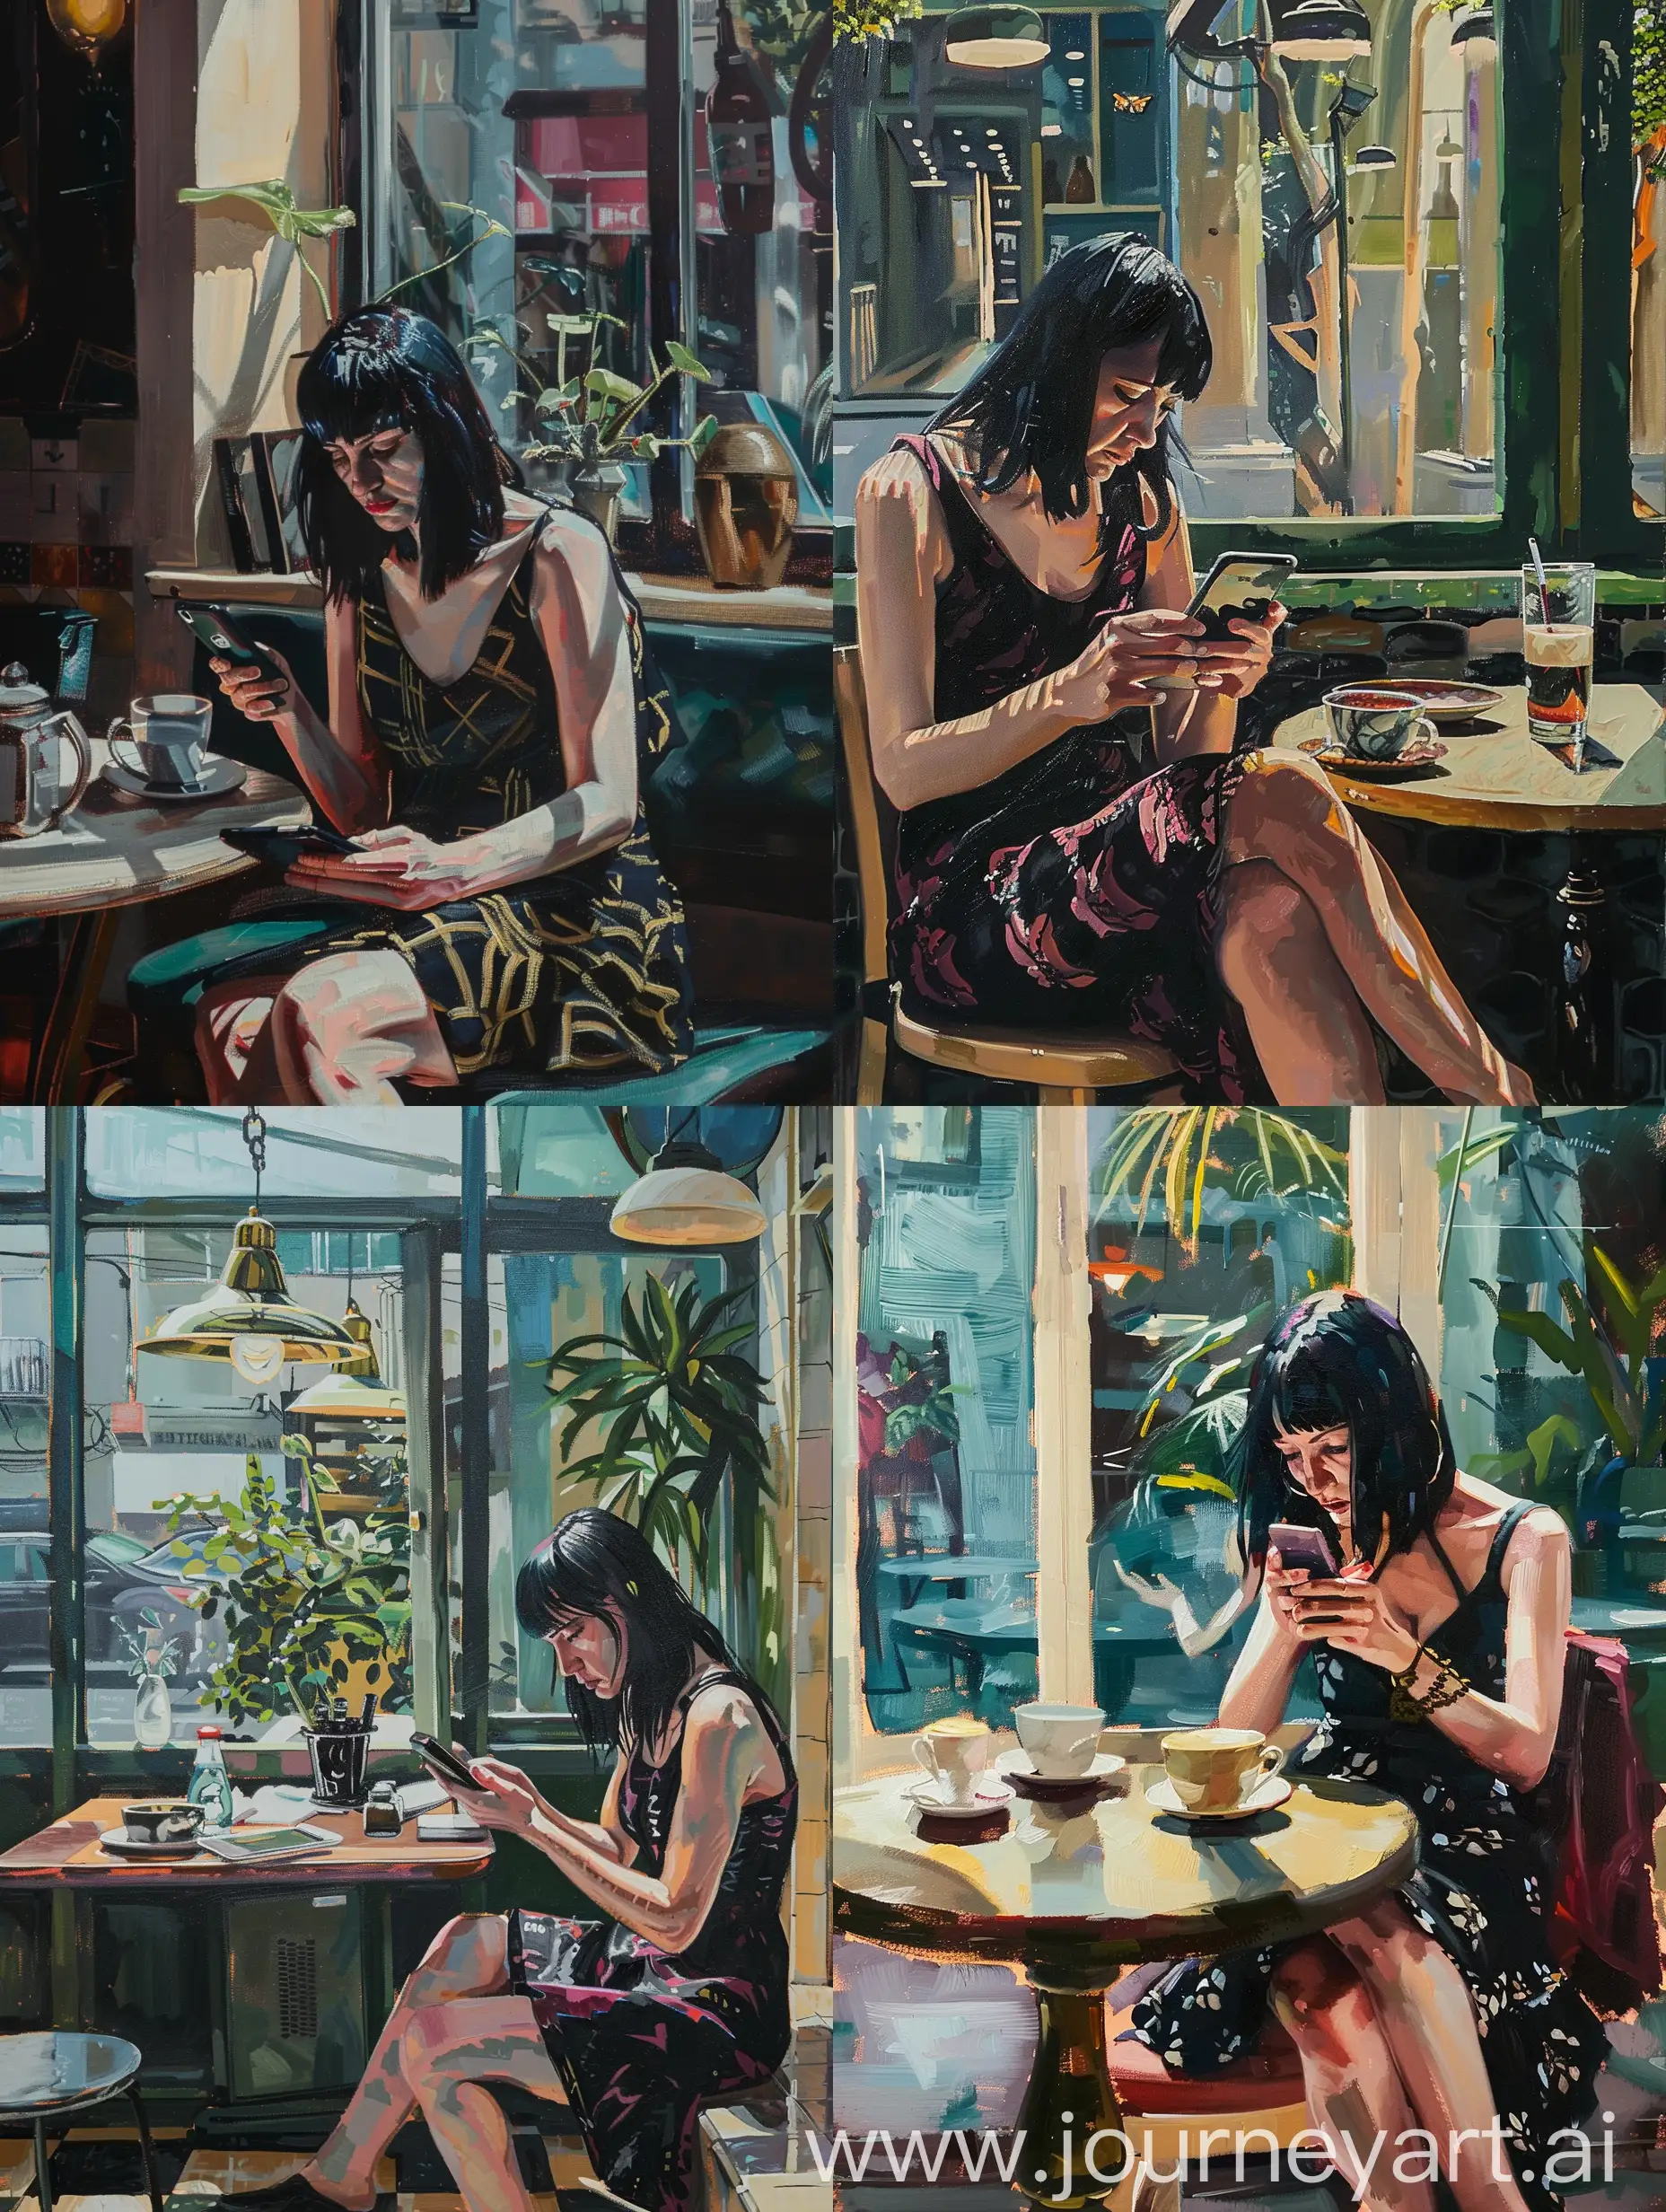 Contemporary-Man-Using-Smartphone-in-Cafe-with-Domestic-Elements-and-Greenery